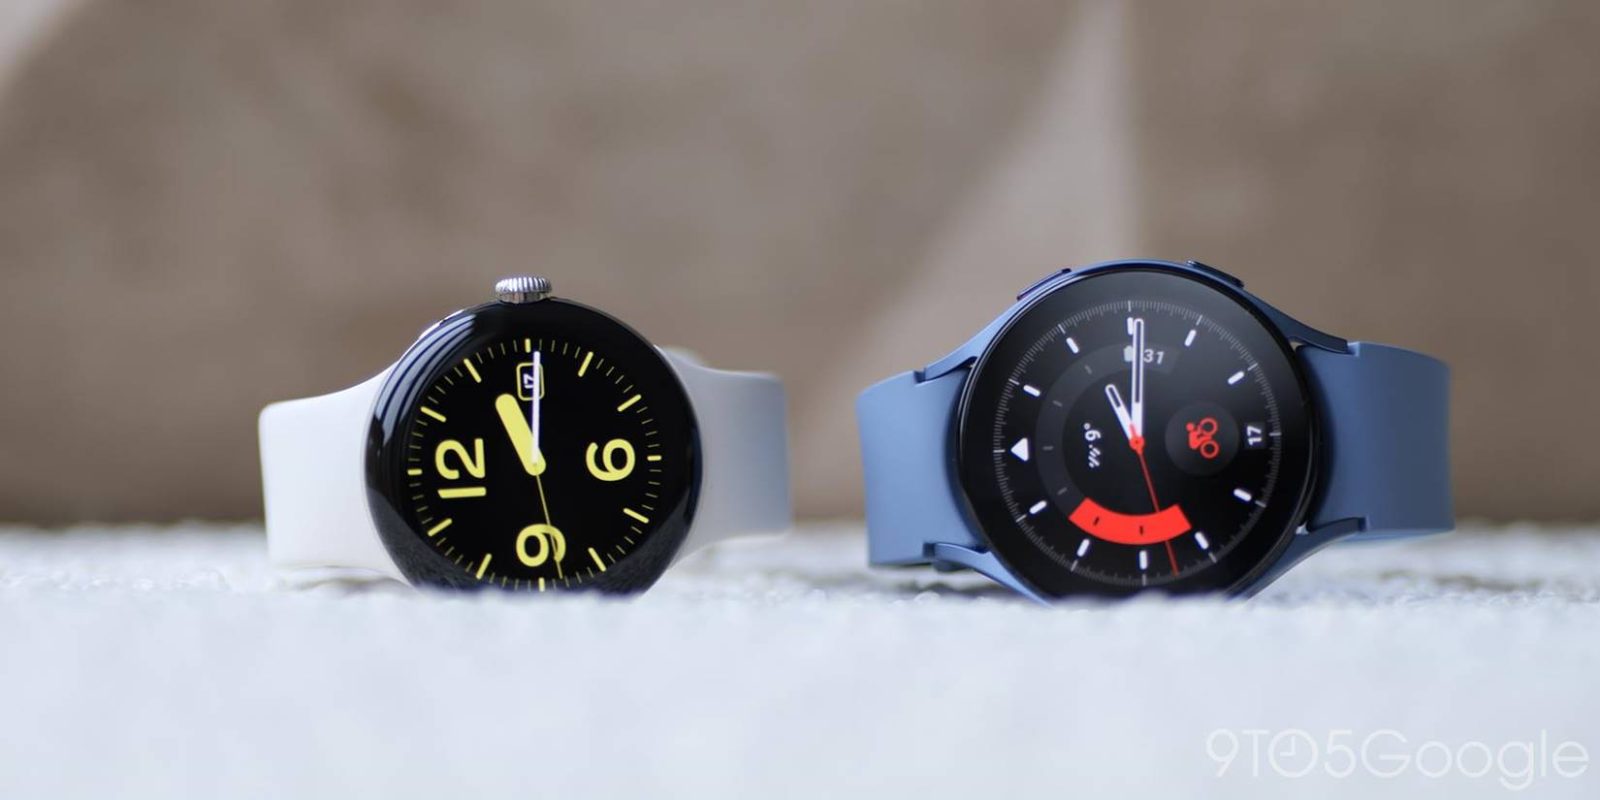 Wear OS is growing quickly, will ship roughly half as many units as Apple Watch this year